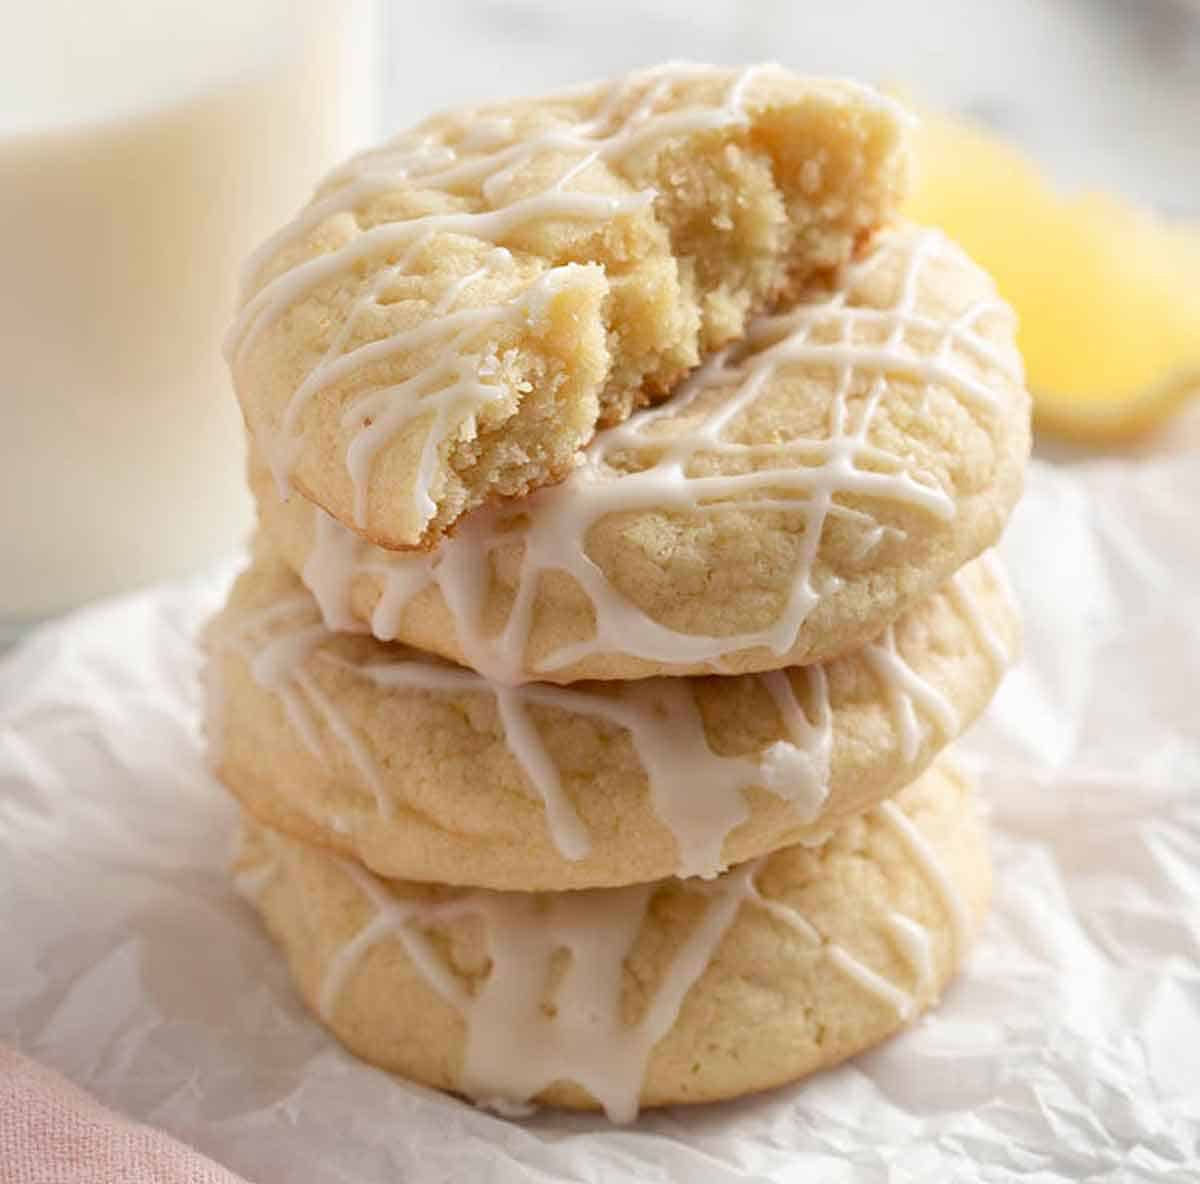 A stack of four lemon cookies with a bite taken out of the first one.